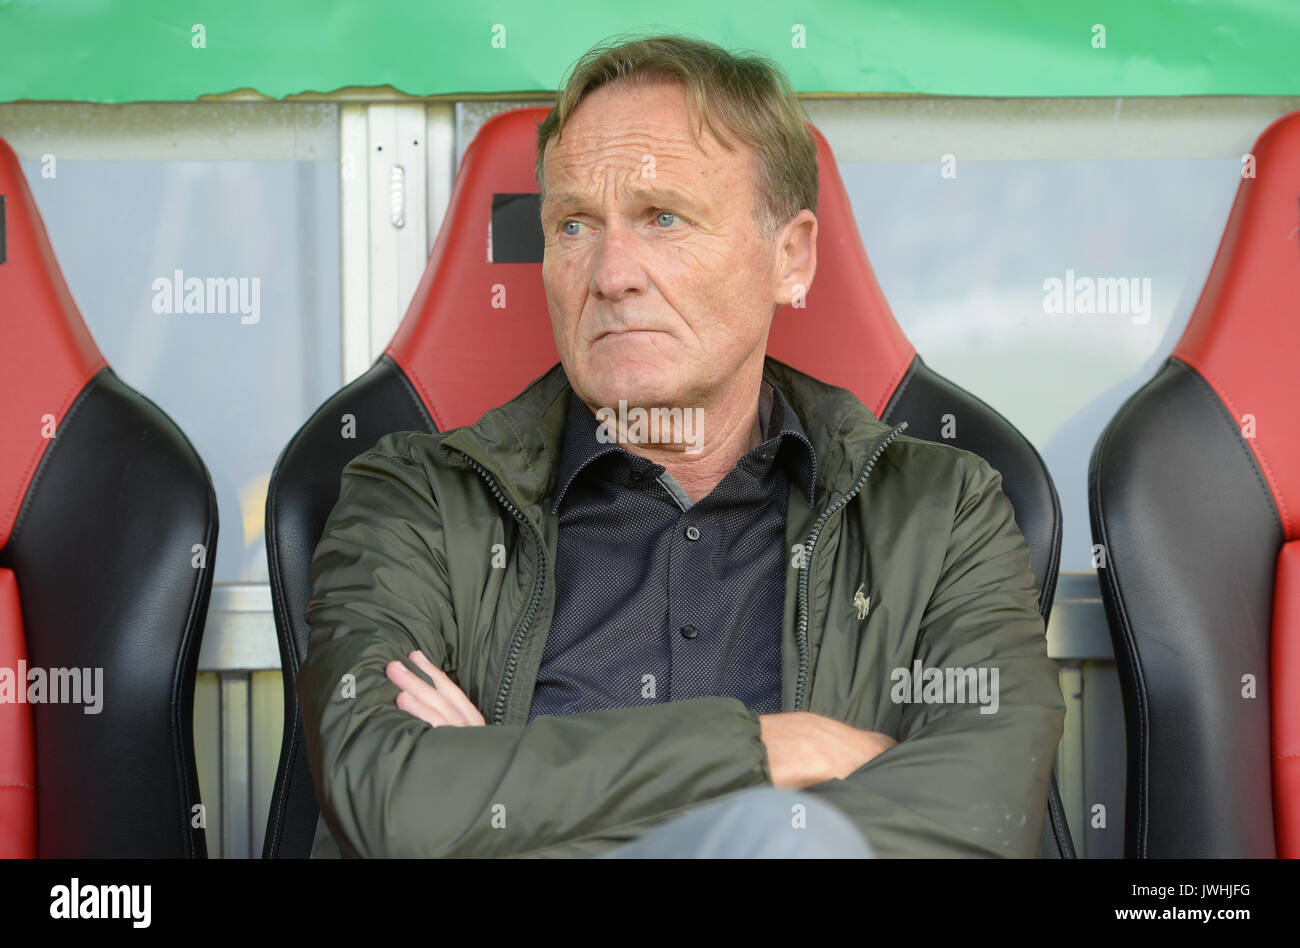 Dortmund's CEO Hans-Joachim Watzke sits on the bench ahead of the German Soccer Association (DFB) Cup first-round soccer match between 1. FC Rielasingen-Arlen and Borussia Dortmund in the Schwarzwald Stadium in Freiburg, Germany, 12 August 2017. The club has announced that Ousmane Dembele, the young attacking midfielder whose breakout season at the club has led to him being linked with clubs across Europe including Barcelona, will remain suspended from the team 'until further notice'. The announcement was made on Sunday morning at a conference with Dortmund's sports director Michael Zorc, mana Stock Photo